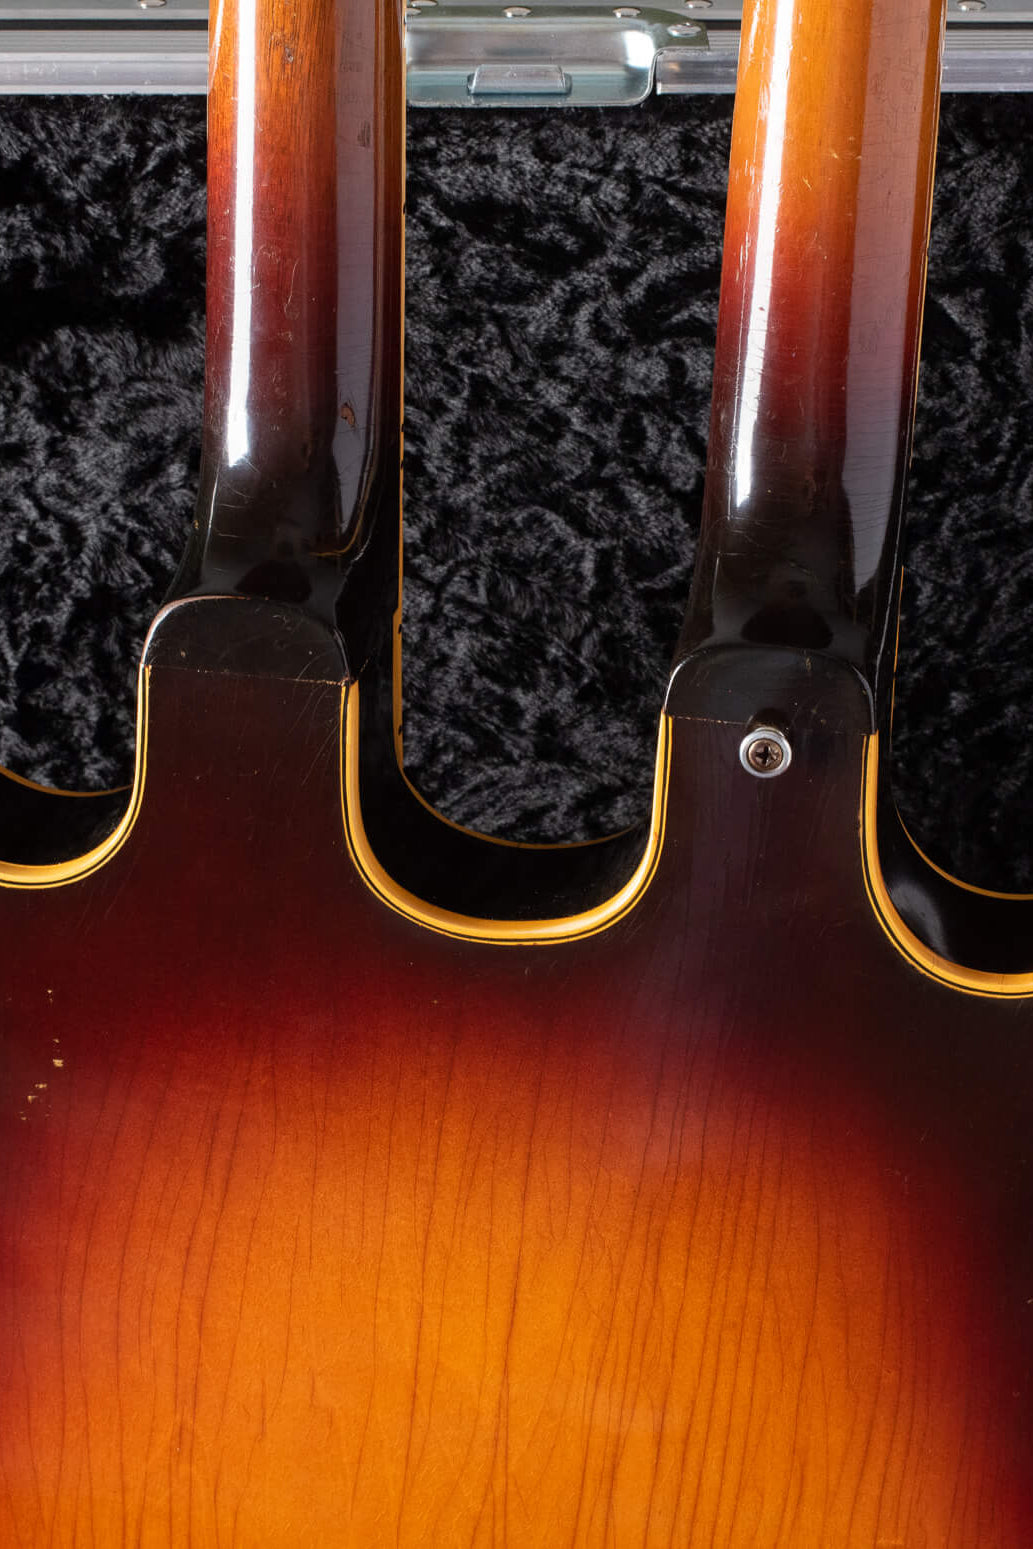 Neck joints of Gibson EDS-1275 1959 double neck guitar